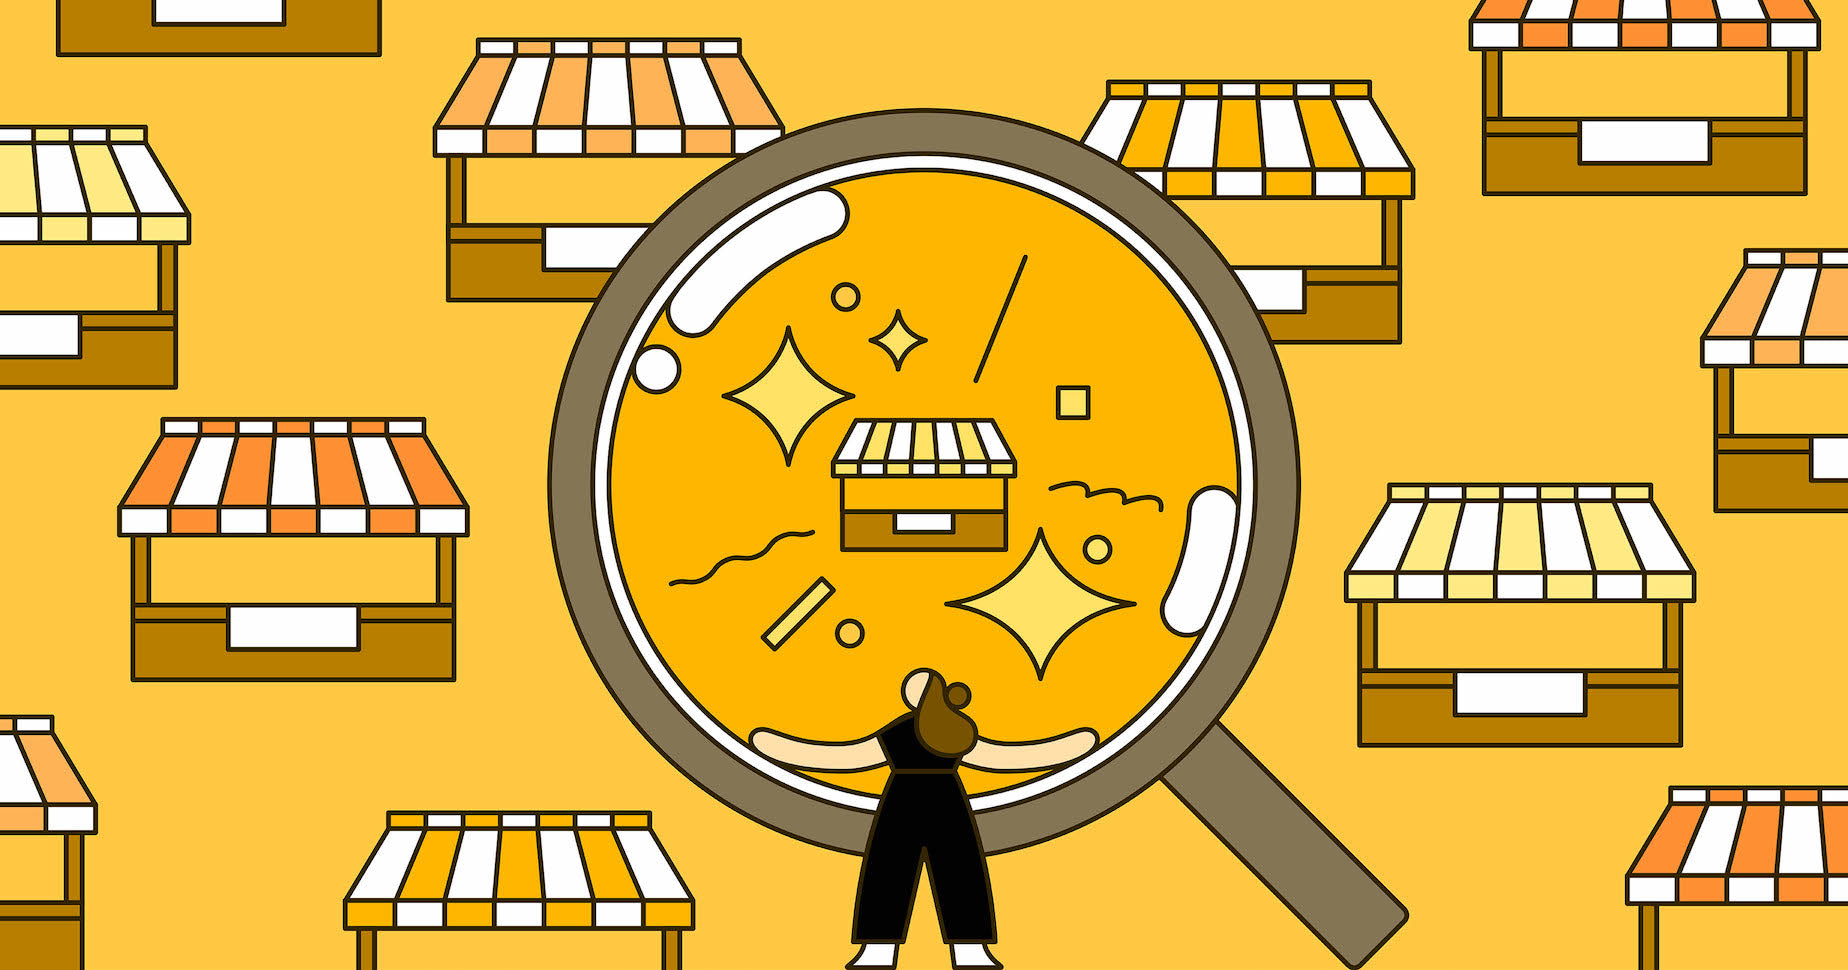 Illustration of a person holding a magnifying glass up to a store, representing the specialization of a niche market.